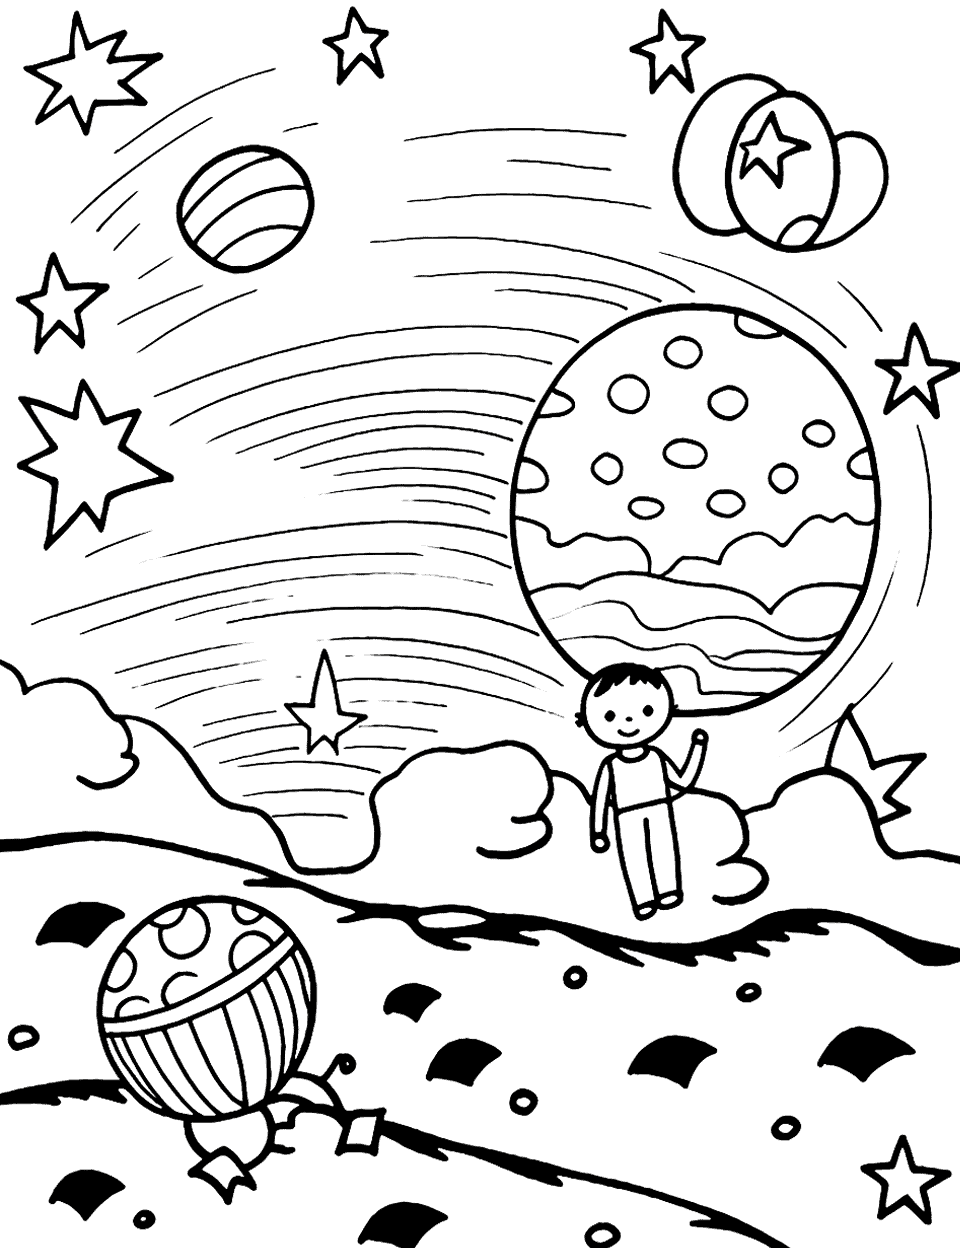 Solar System Exploration Summer Coloring Page - Kids exploring the solar system, visiting different planets, and encountering alien life.